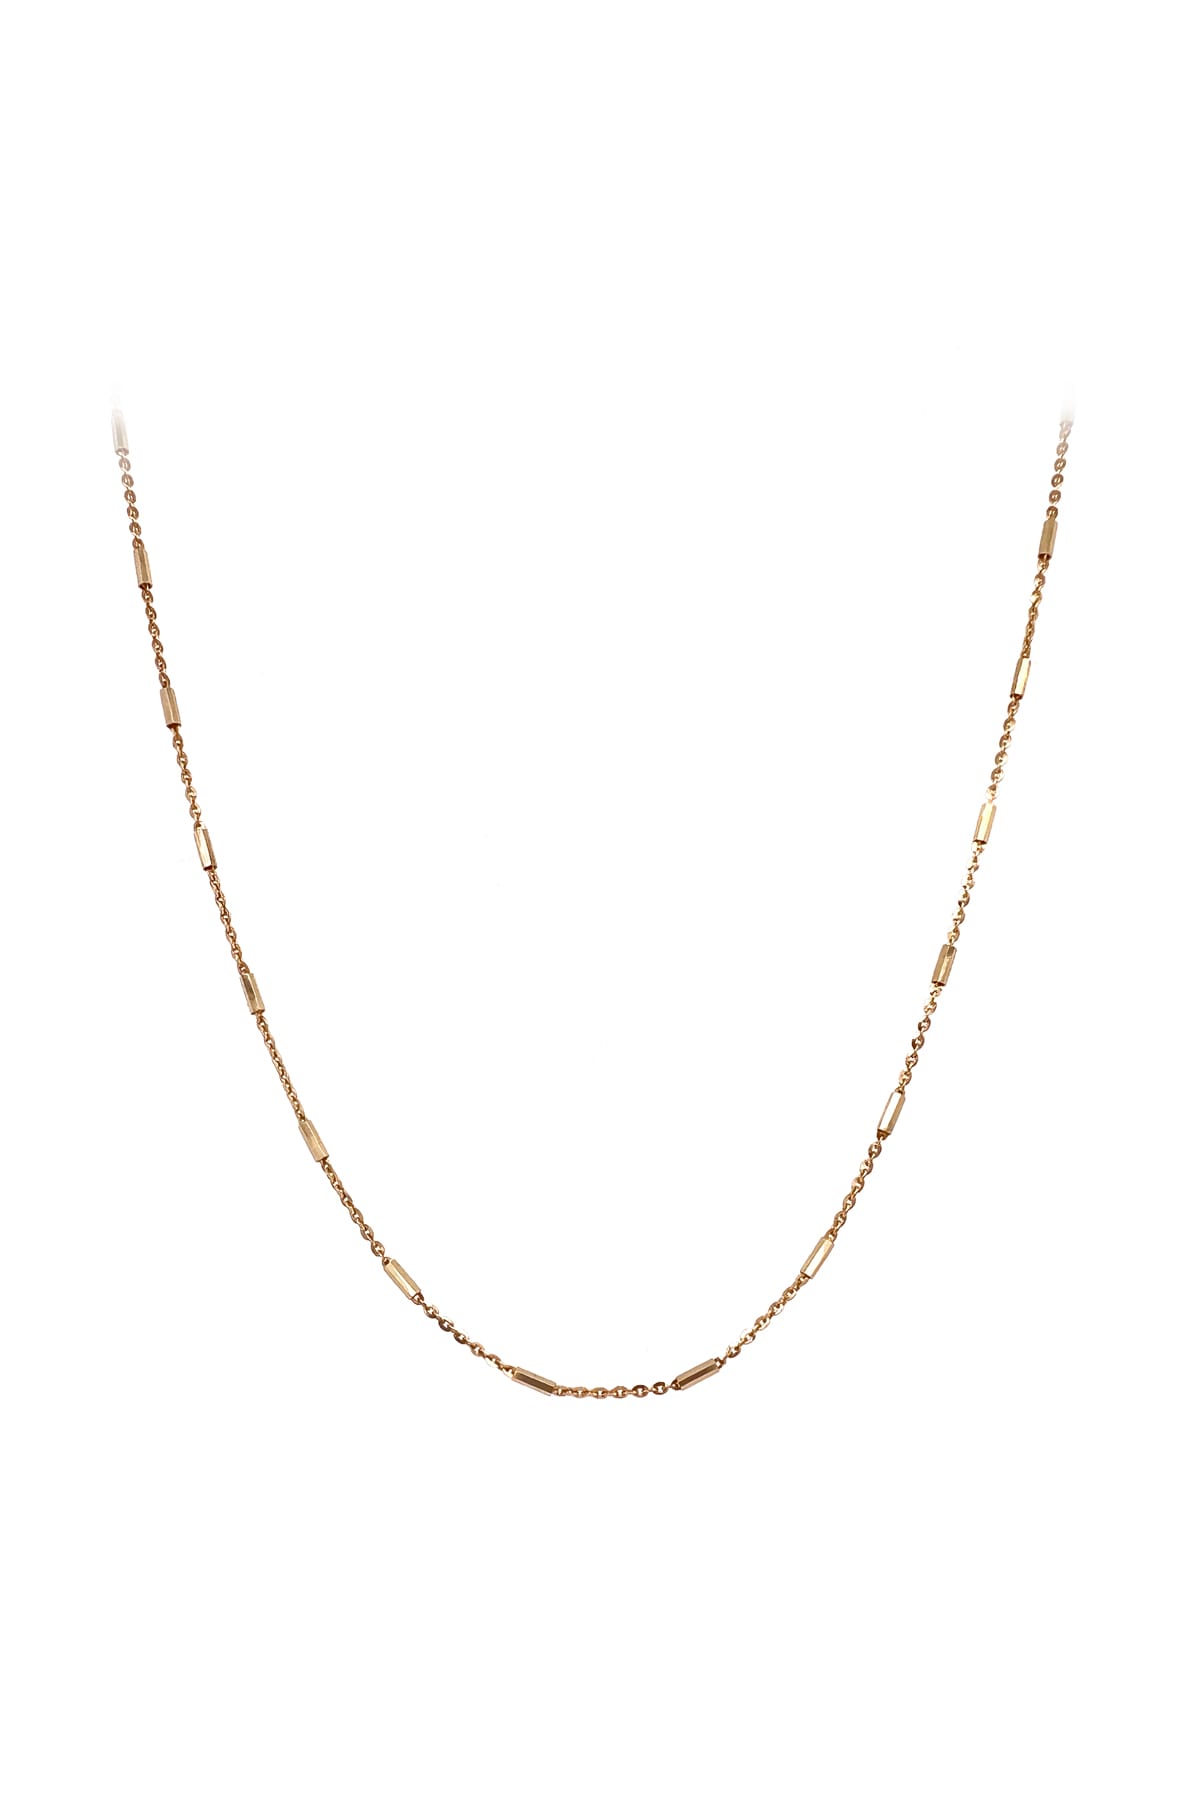 18 Carat Yellow Gold Trace Chain With Bars available at LeGassick Diamonds and Jewellery Gold Coast, Australia.